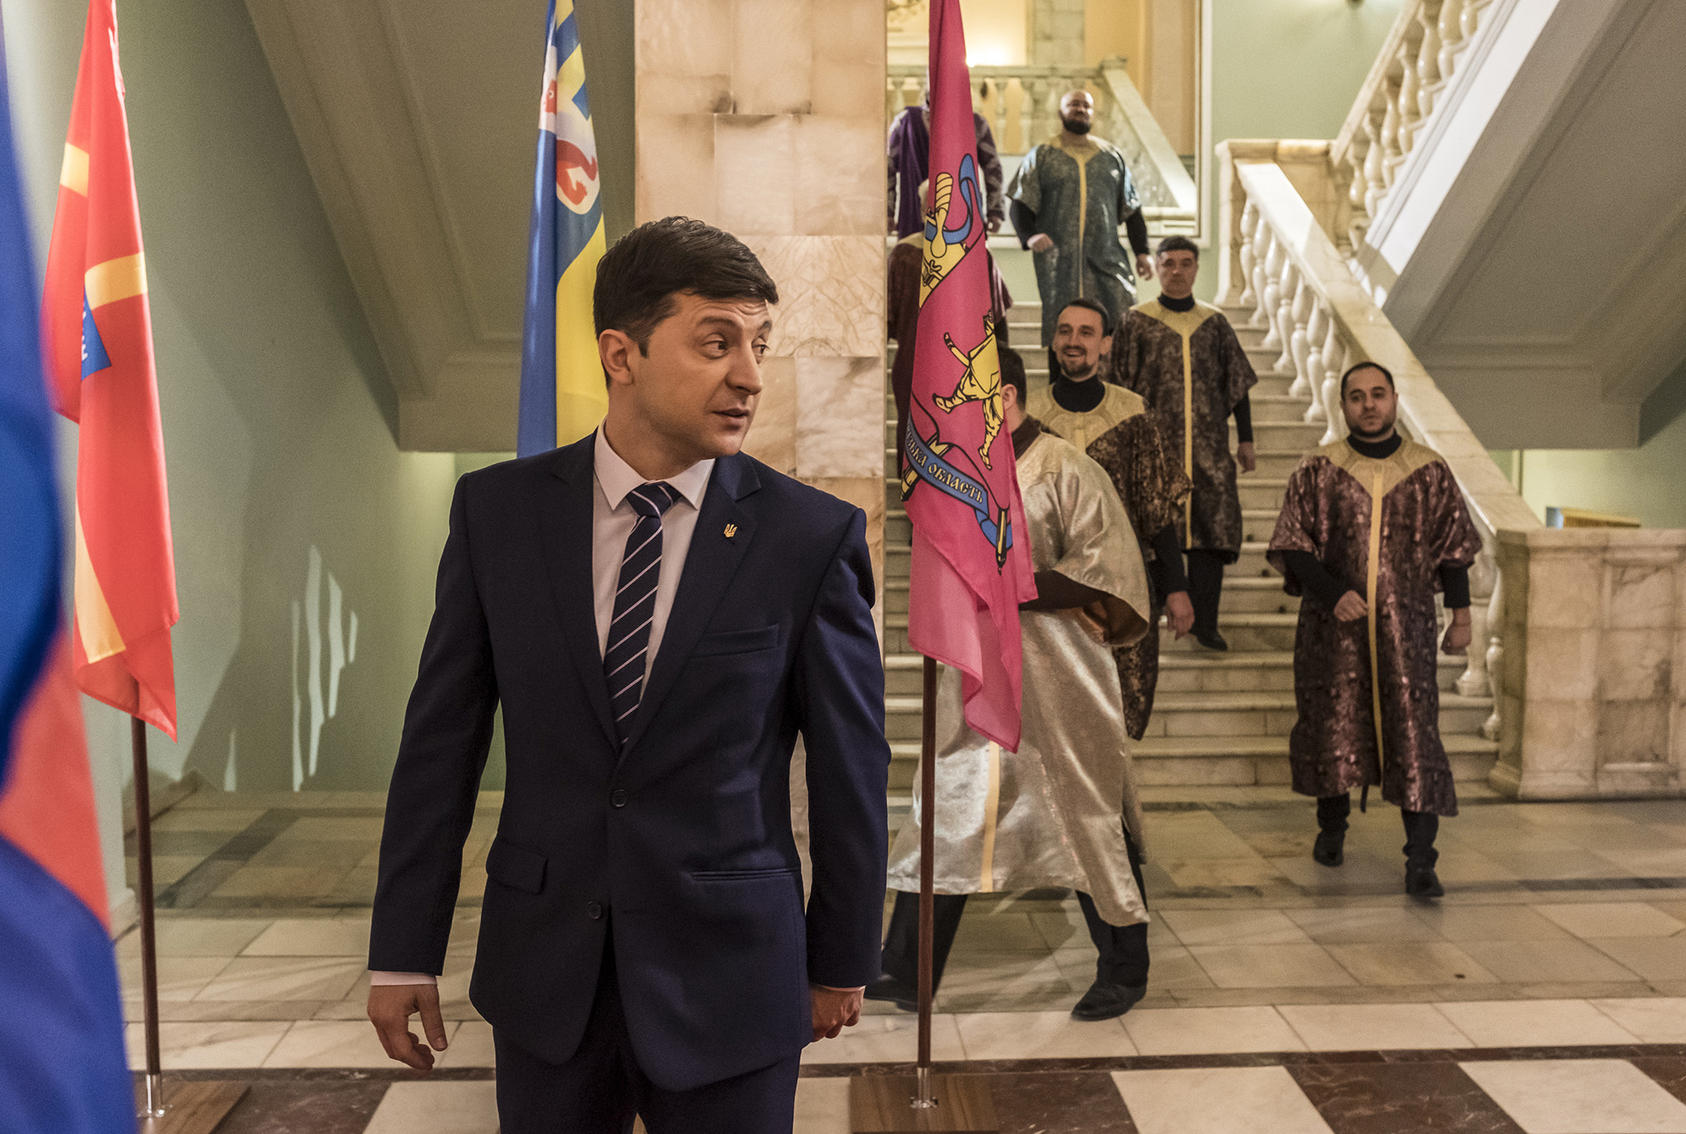 Amid the election campaign, Volodymyr Zelenskiy rehearses on the set of the TV show in which he played an accidental president. His election as Ukraine’s real leader poses new questions. (Brendan Hoffman/The New York Times)